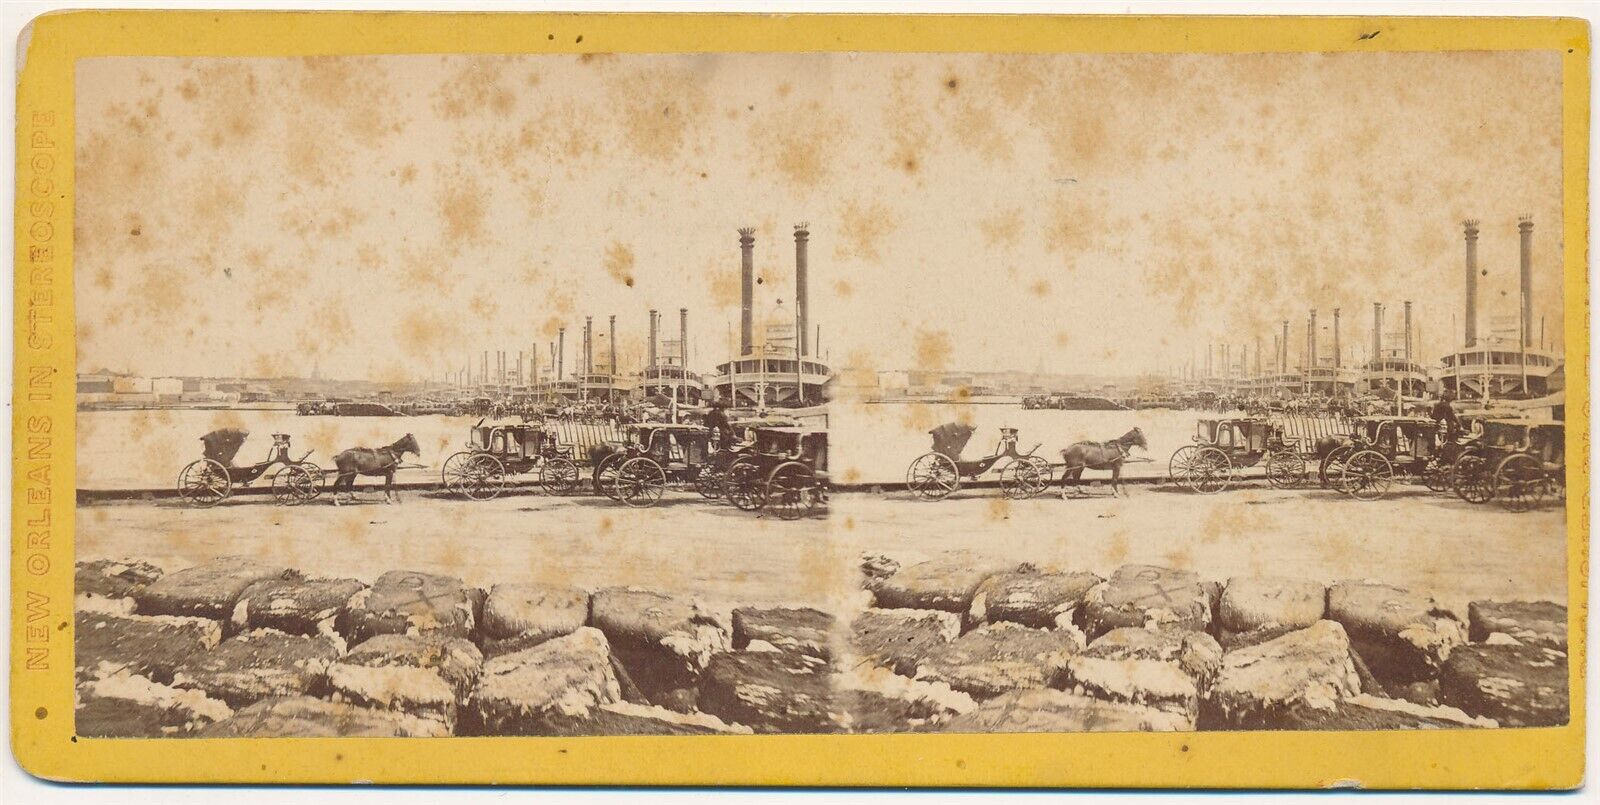 LOUISIANA SV - New Orleans - Steamboats & Carriages - ST Blessing 1870s